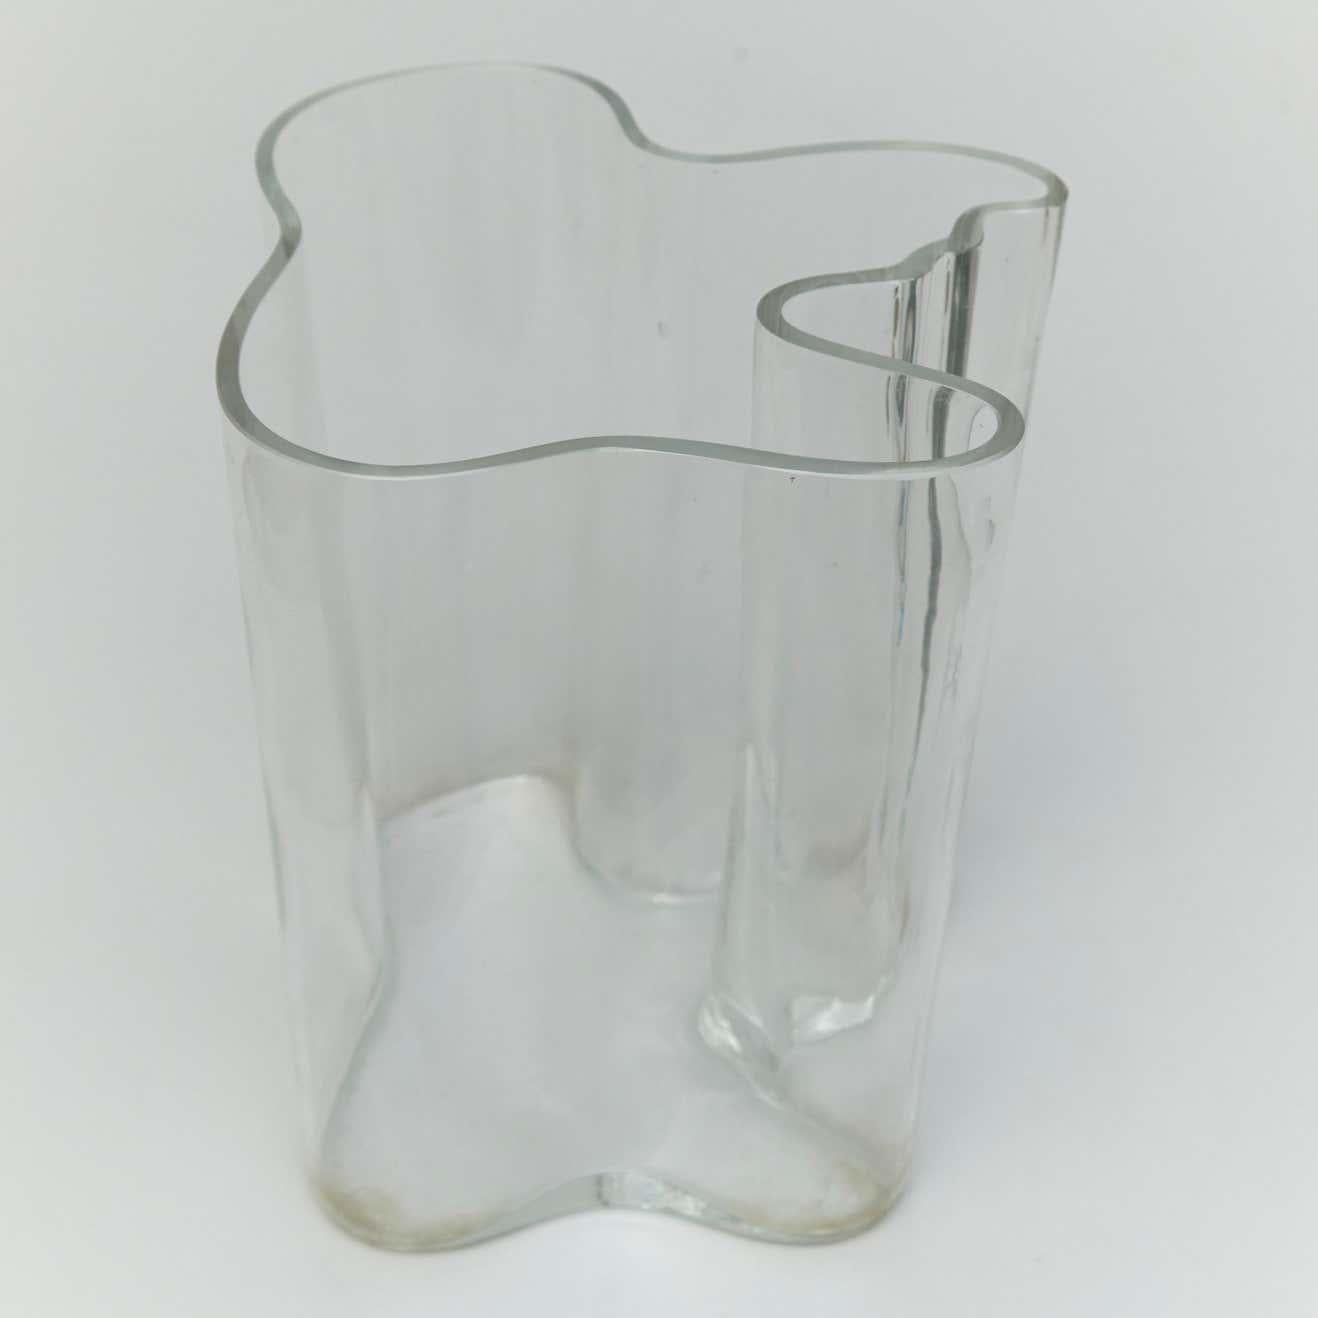 Glass designed by Alvar Aalto, circa 1960.
Manufactured in Finland.

Signed

In original condition, with minor wear consistent with age and use, preserving a beautiful patina.

Hugo Alvar Henrik Aalto (1898-1976) was a Finnish architect and